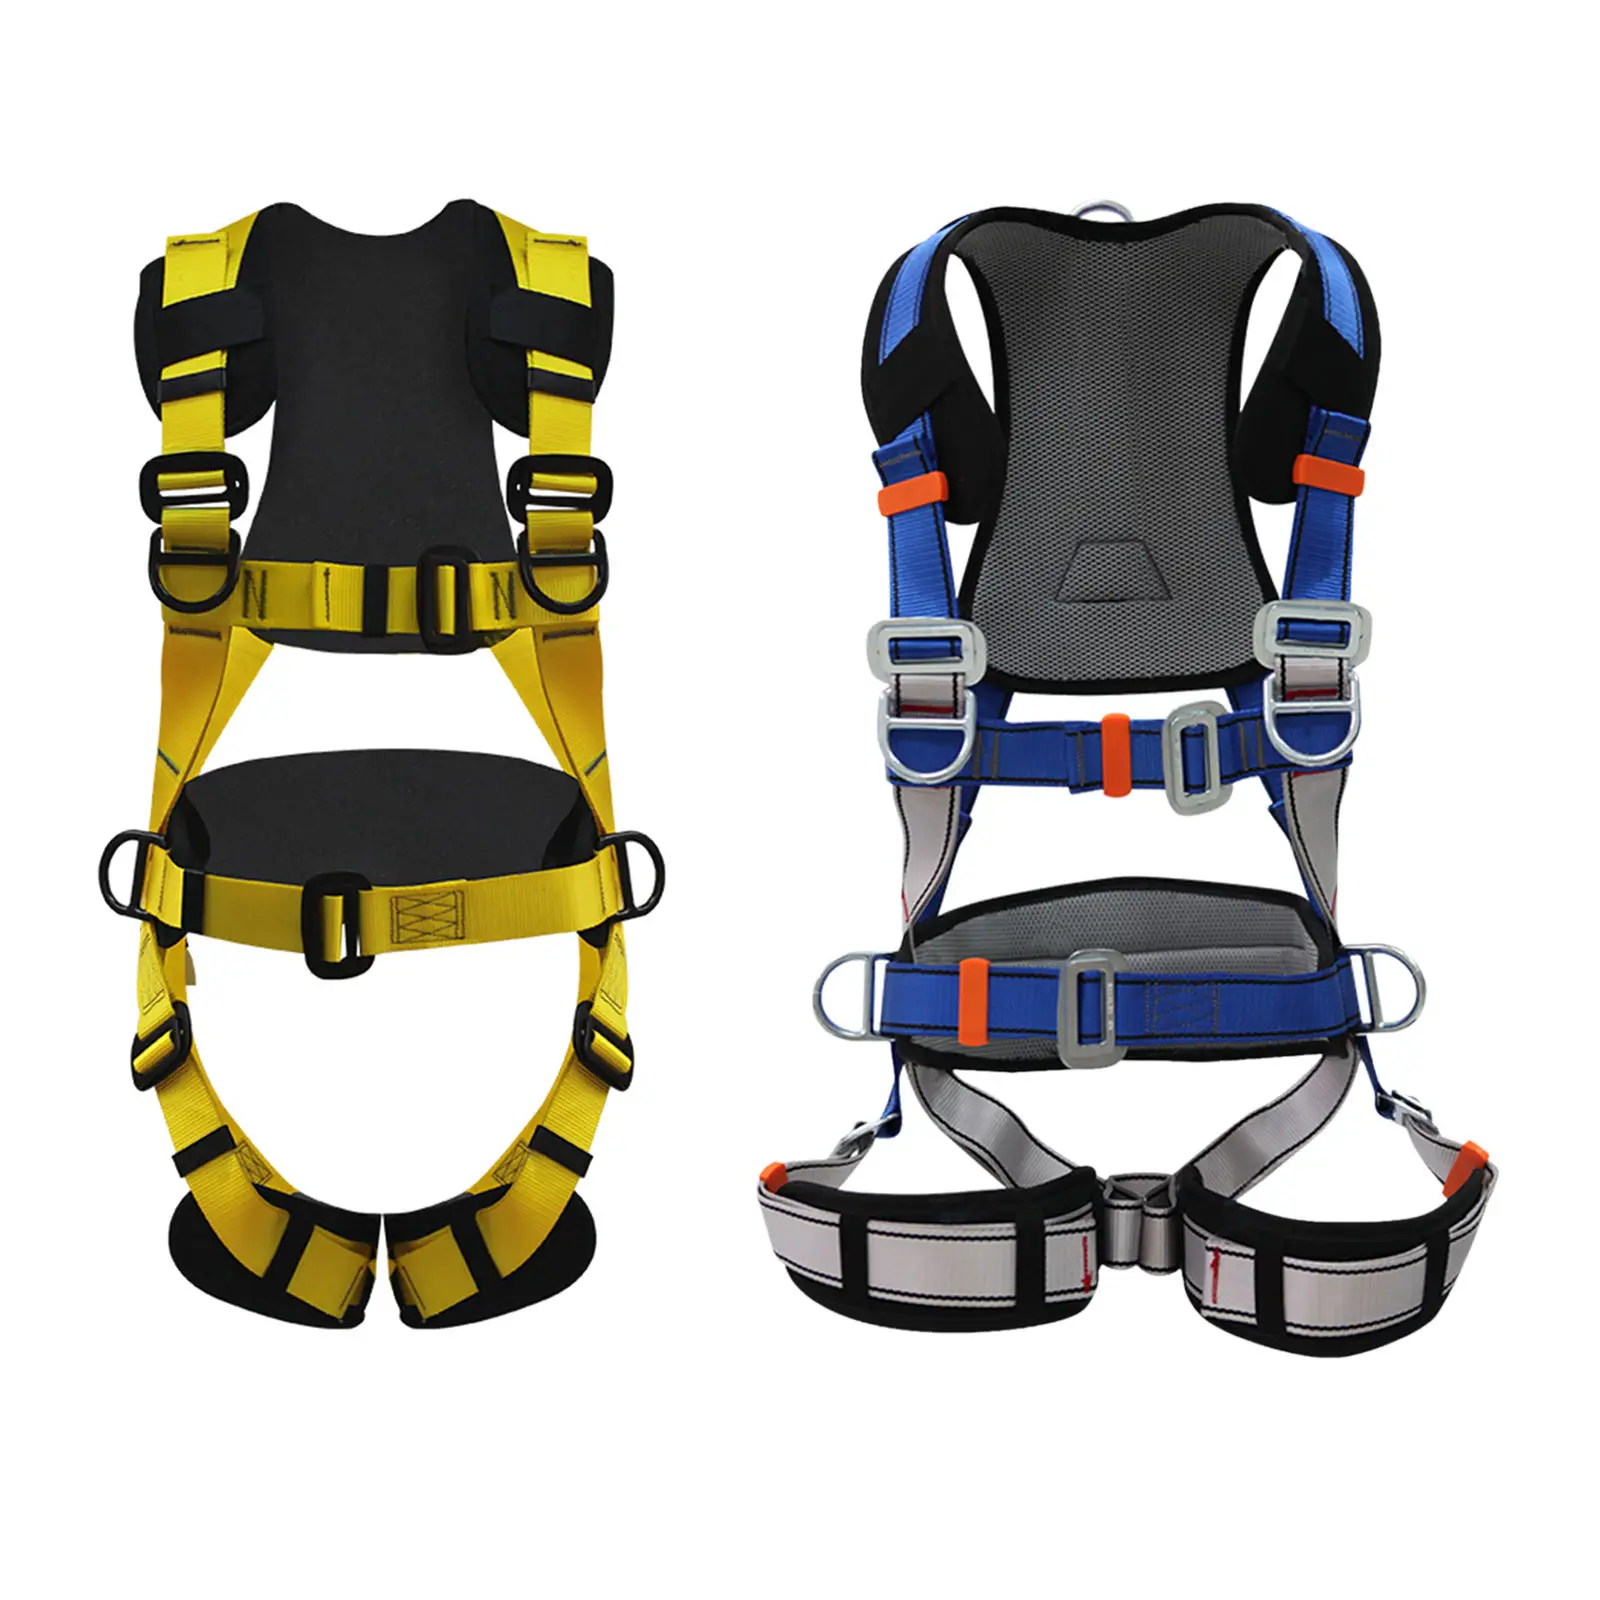 Climbing Harness Full Body Safety Belt Tree Rock Climbing for Rappelling Mountaineering Fire Rescuing Accessories Gear